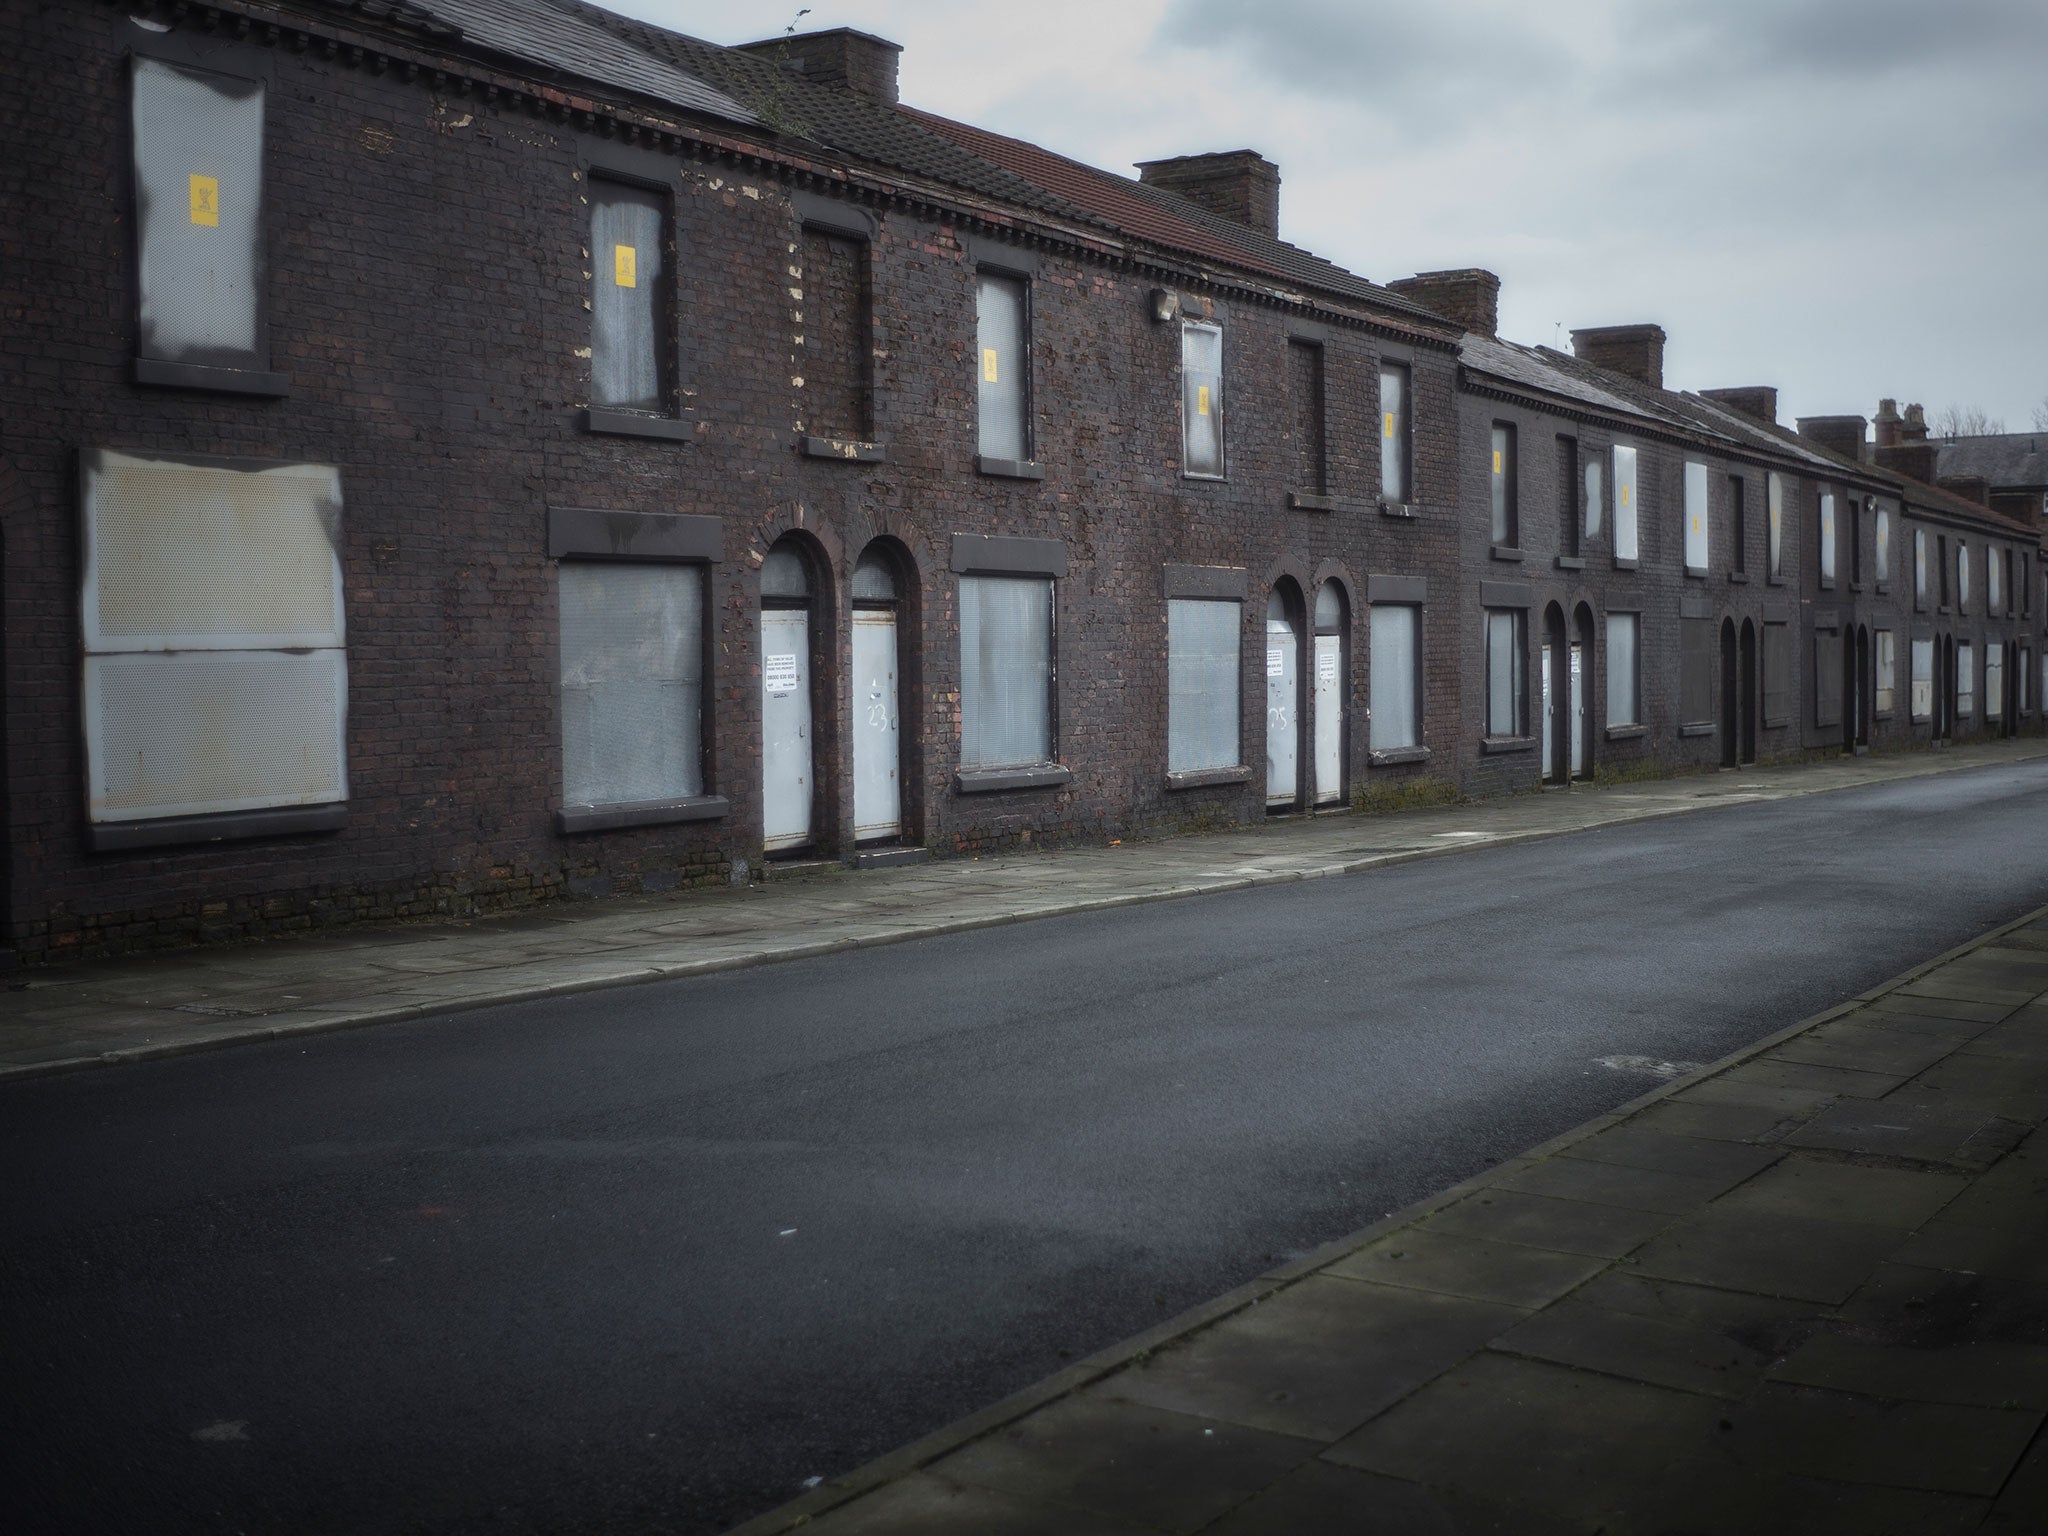 Eleven of Liverpool’s neighbourhoods are among the most deprived one per cent in the country